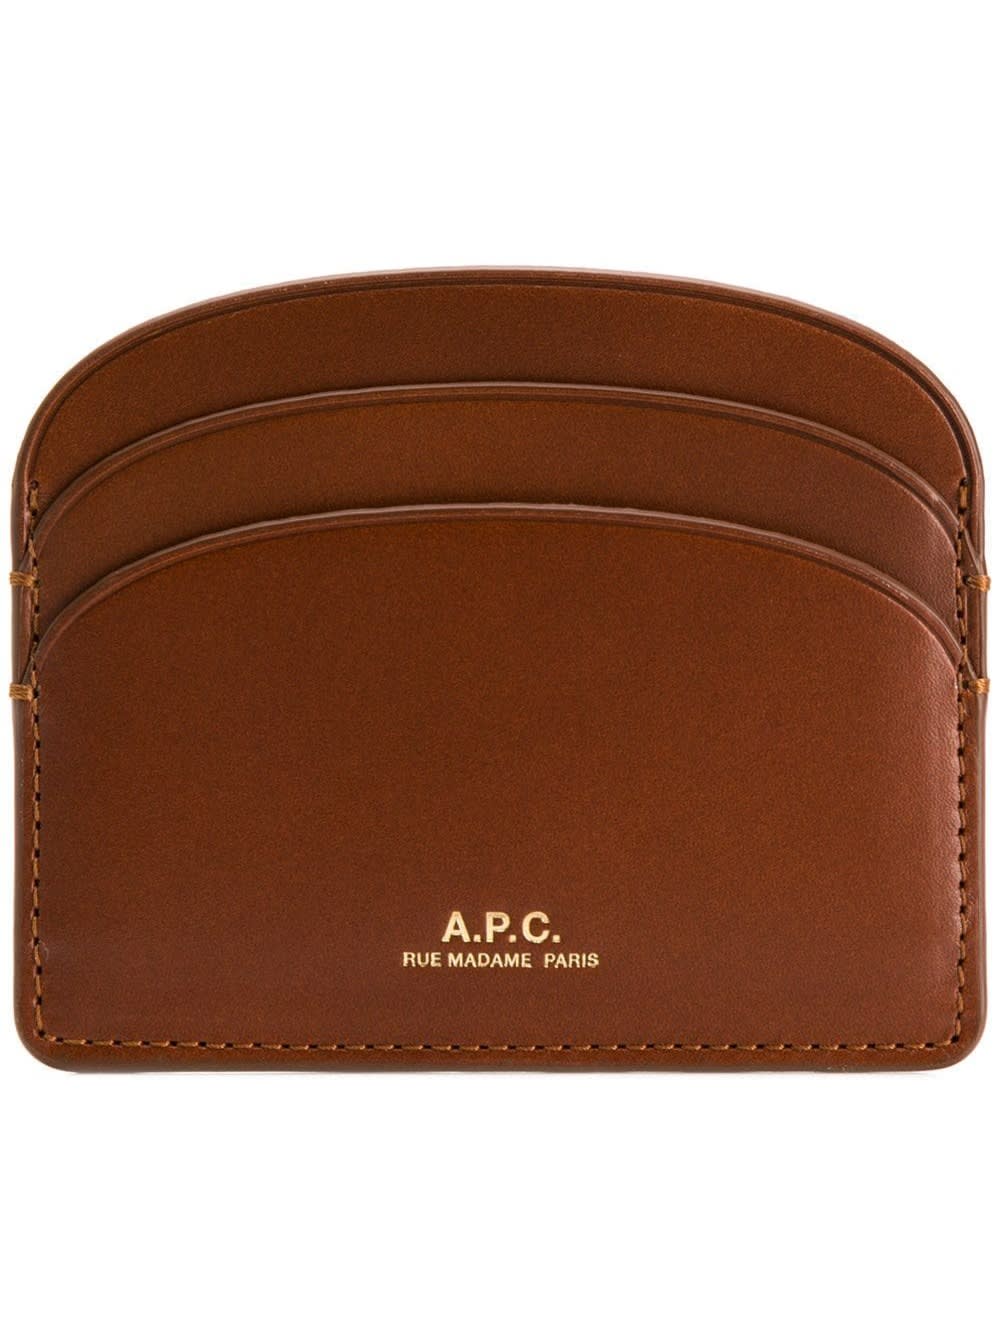 A.P.C. Demi Lune Brown Leather Card Holder With Logo A.p.c. Woman